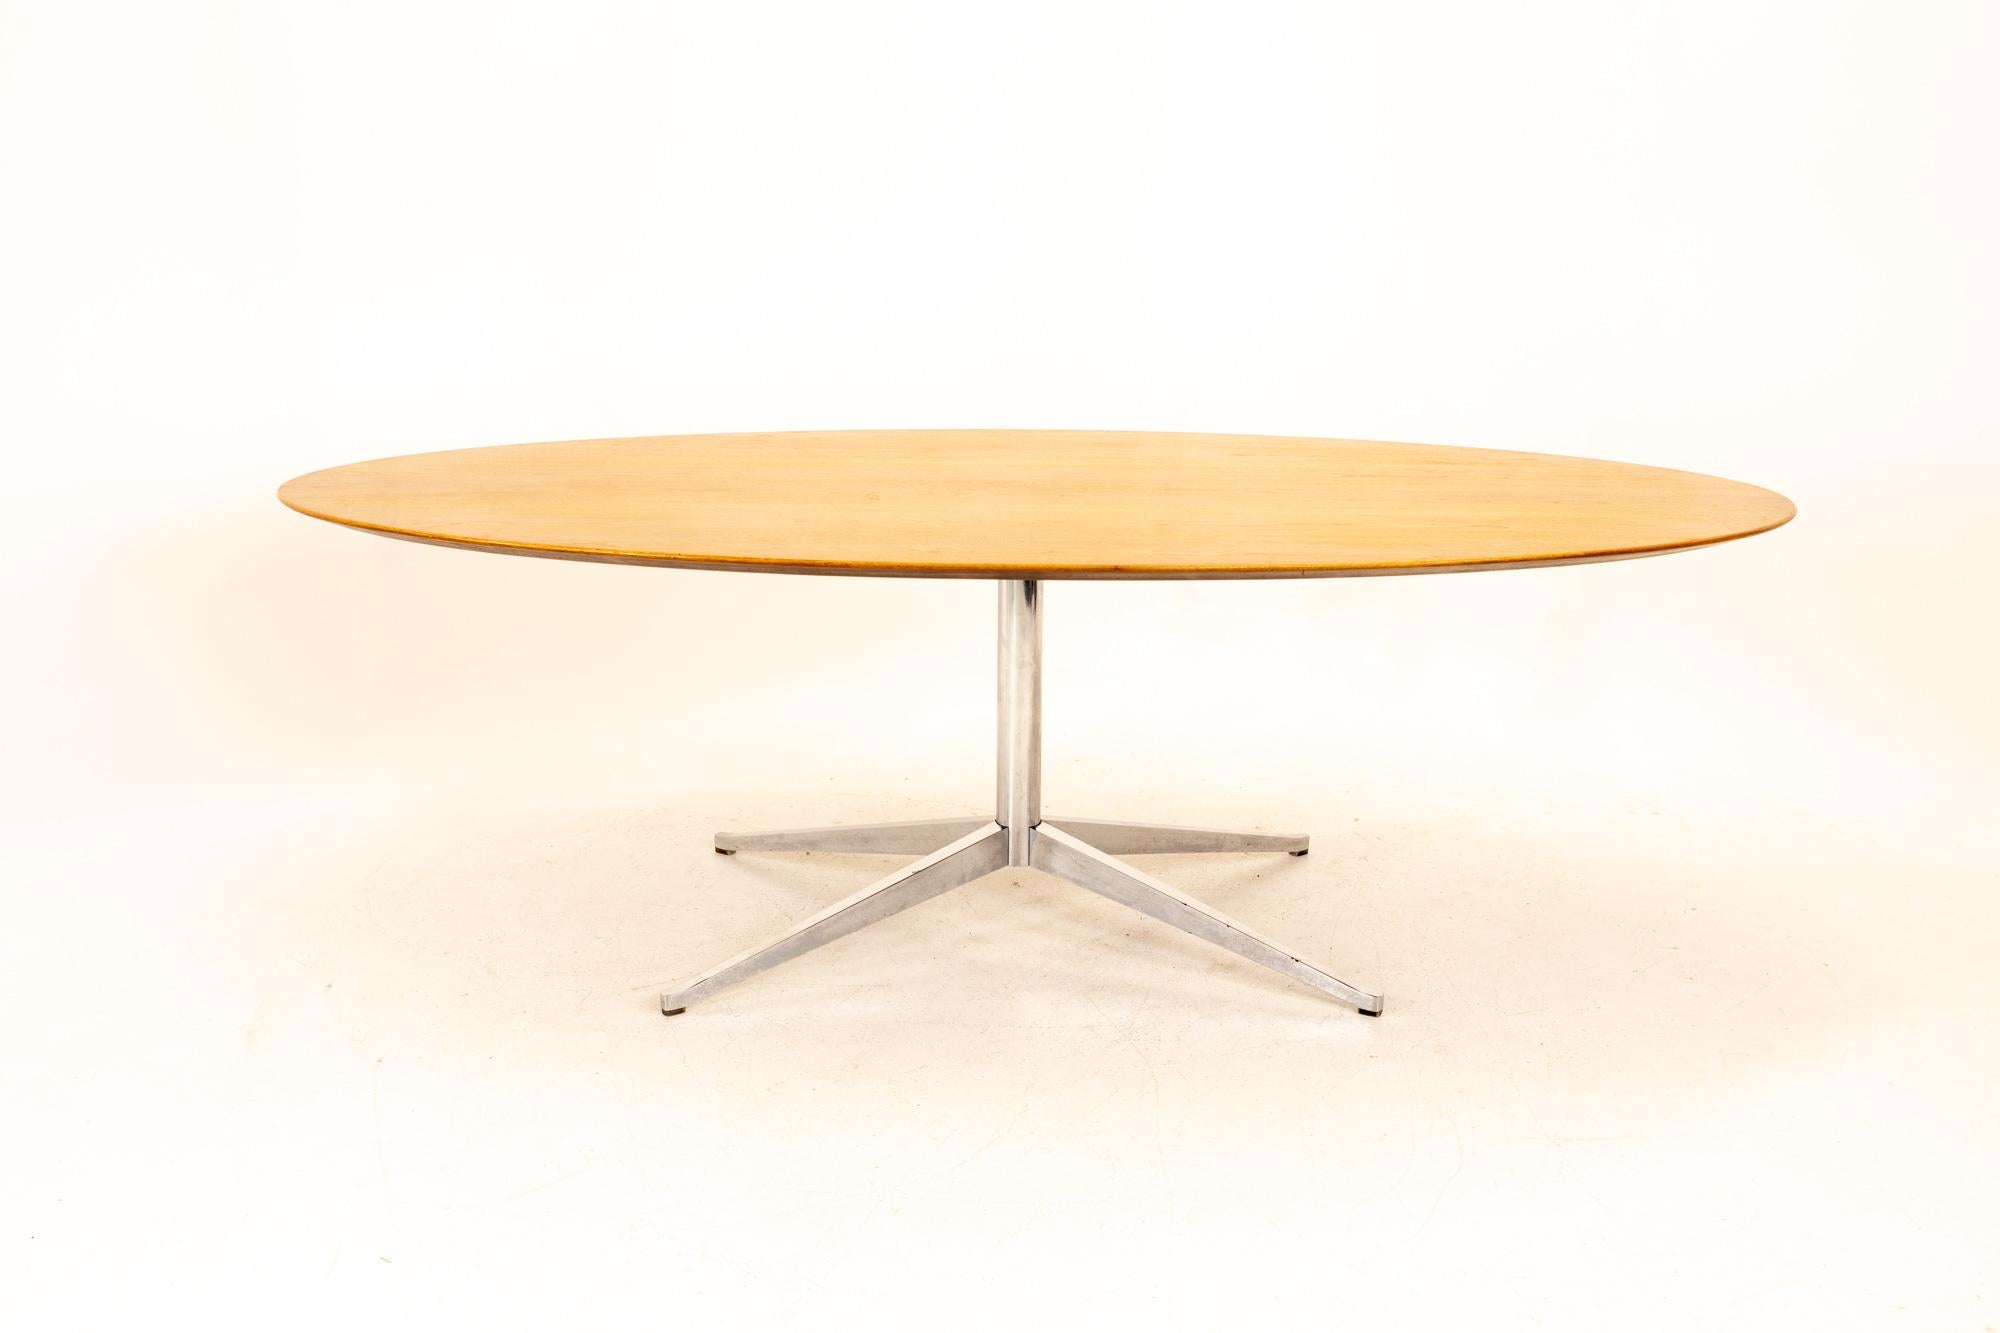 Florence Knoll Mid Century walnut and chrome oval dining table
Table measures: 89.75 wide x 48 deep x 27.75 high

This piece is available in what we call restored vintage condition. Upon purchase it is fixed so it’s free of watermarks, chips or deep